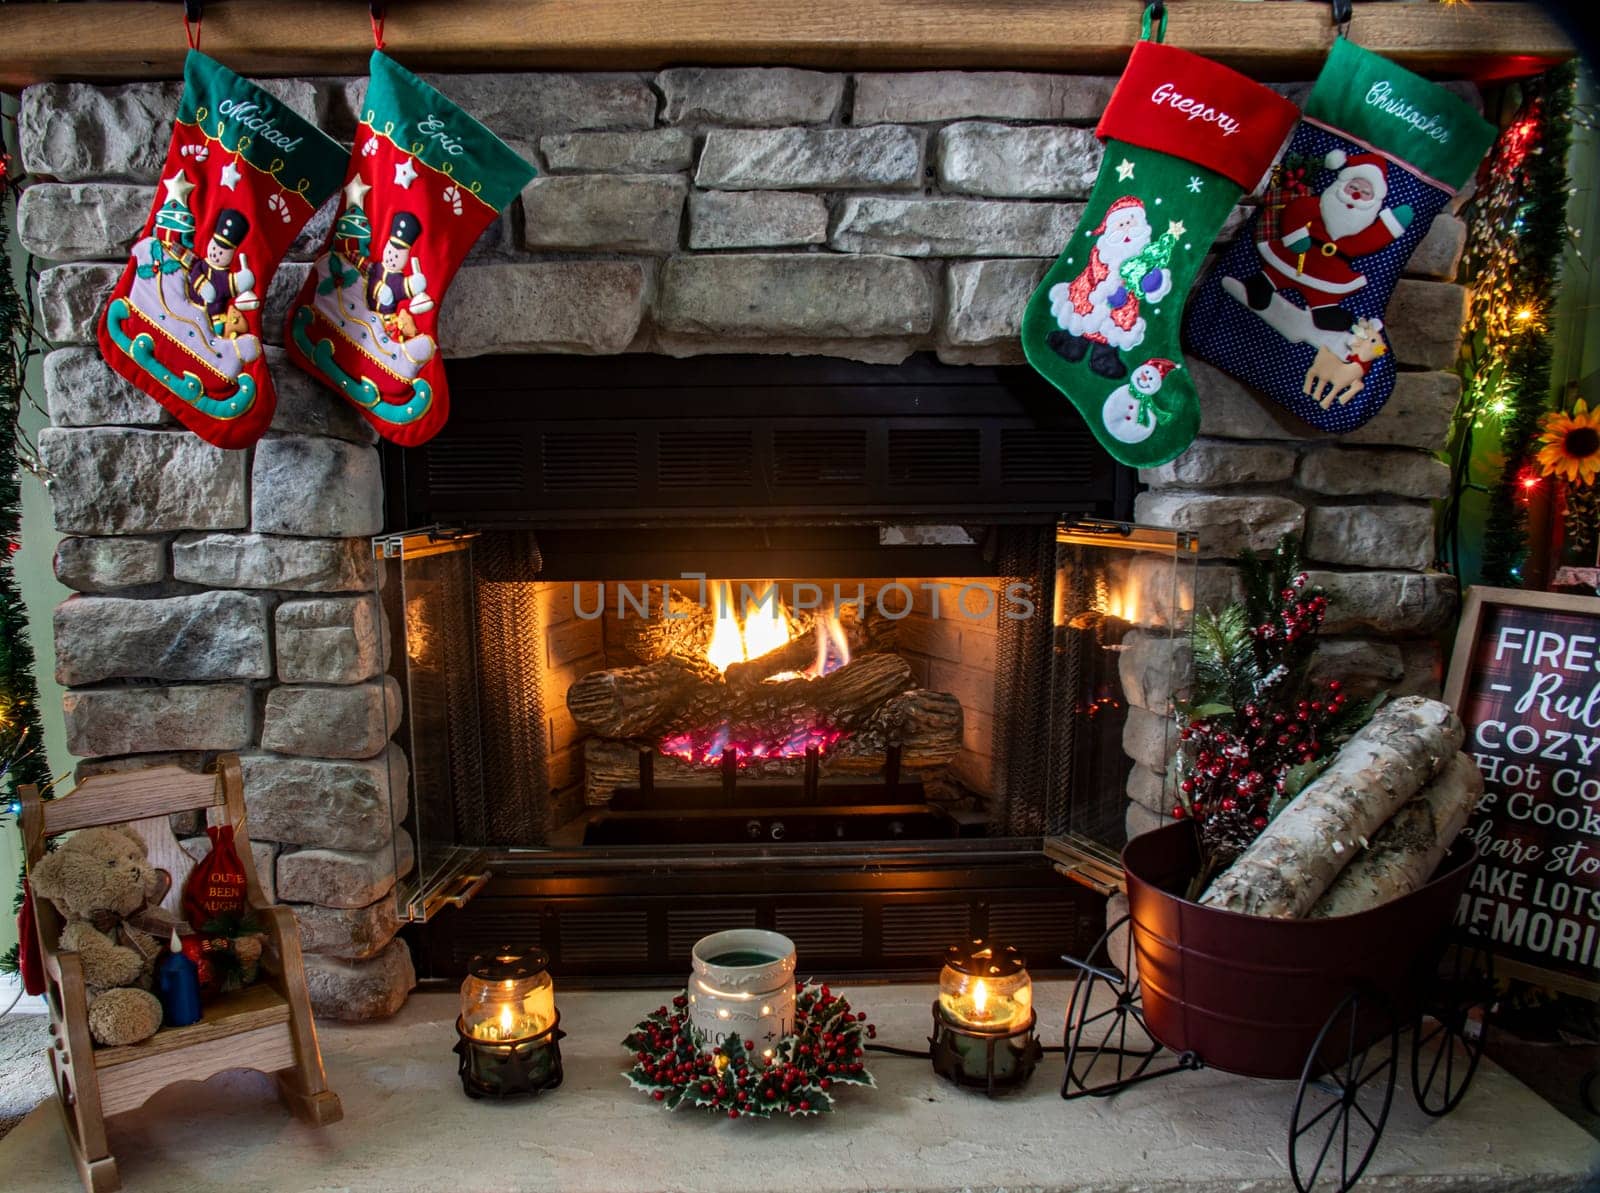 Fireplace with red green stocking hanging from it. Stocking is decorated with a santa and a snowman by actionphoto50